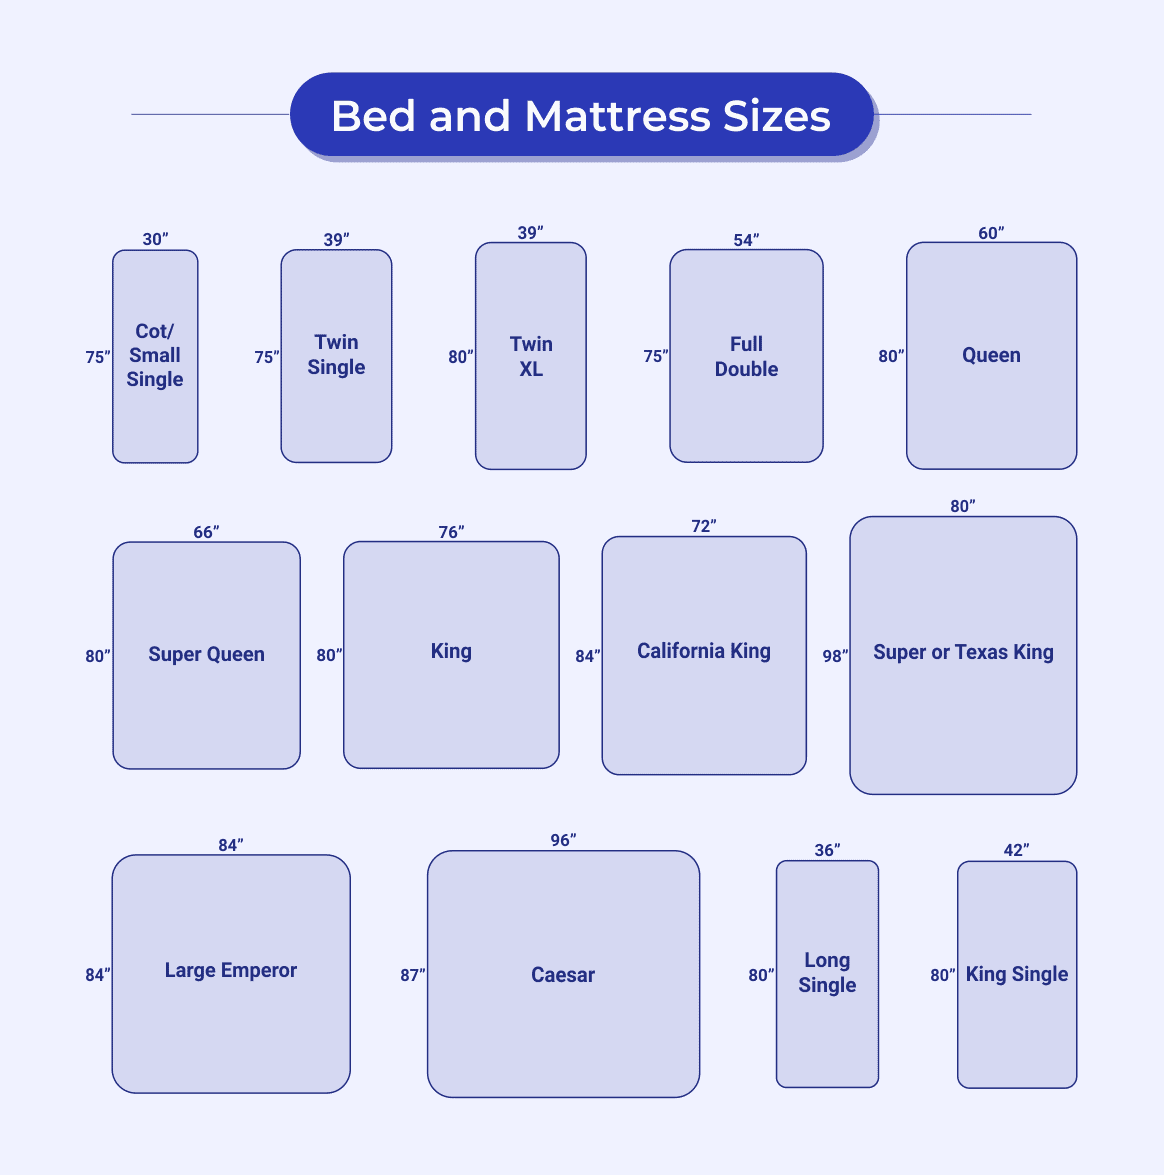 Mattress And Bed Sizes What Are The, What Larger Than A King Size Bed